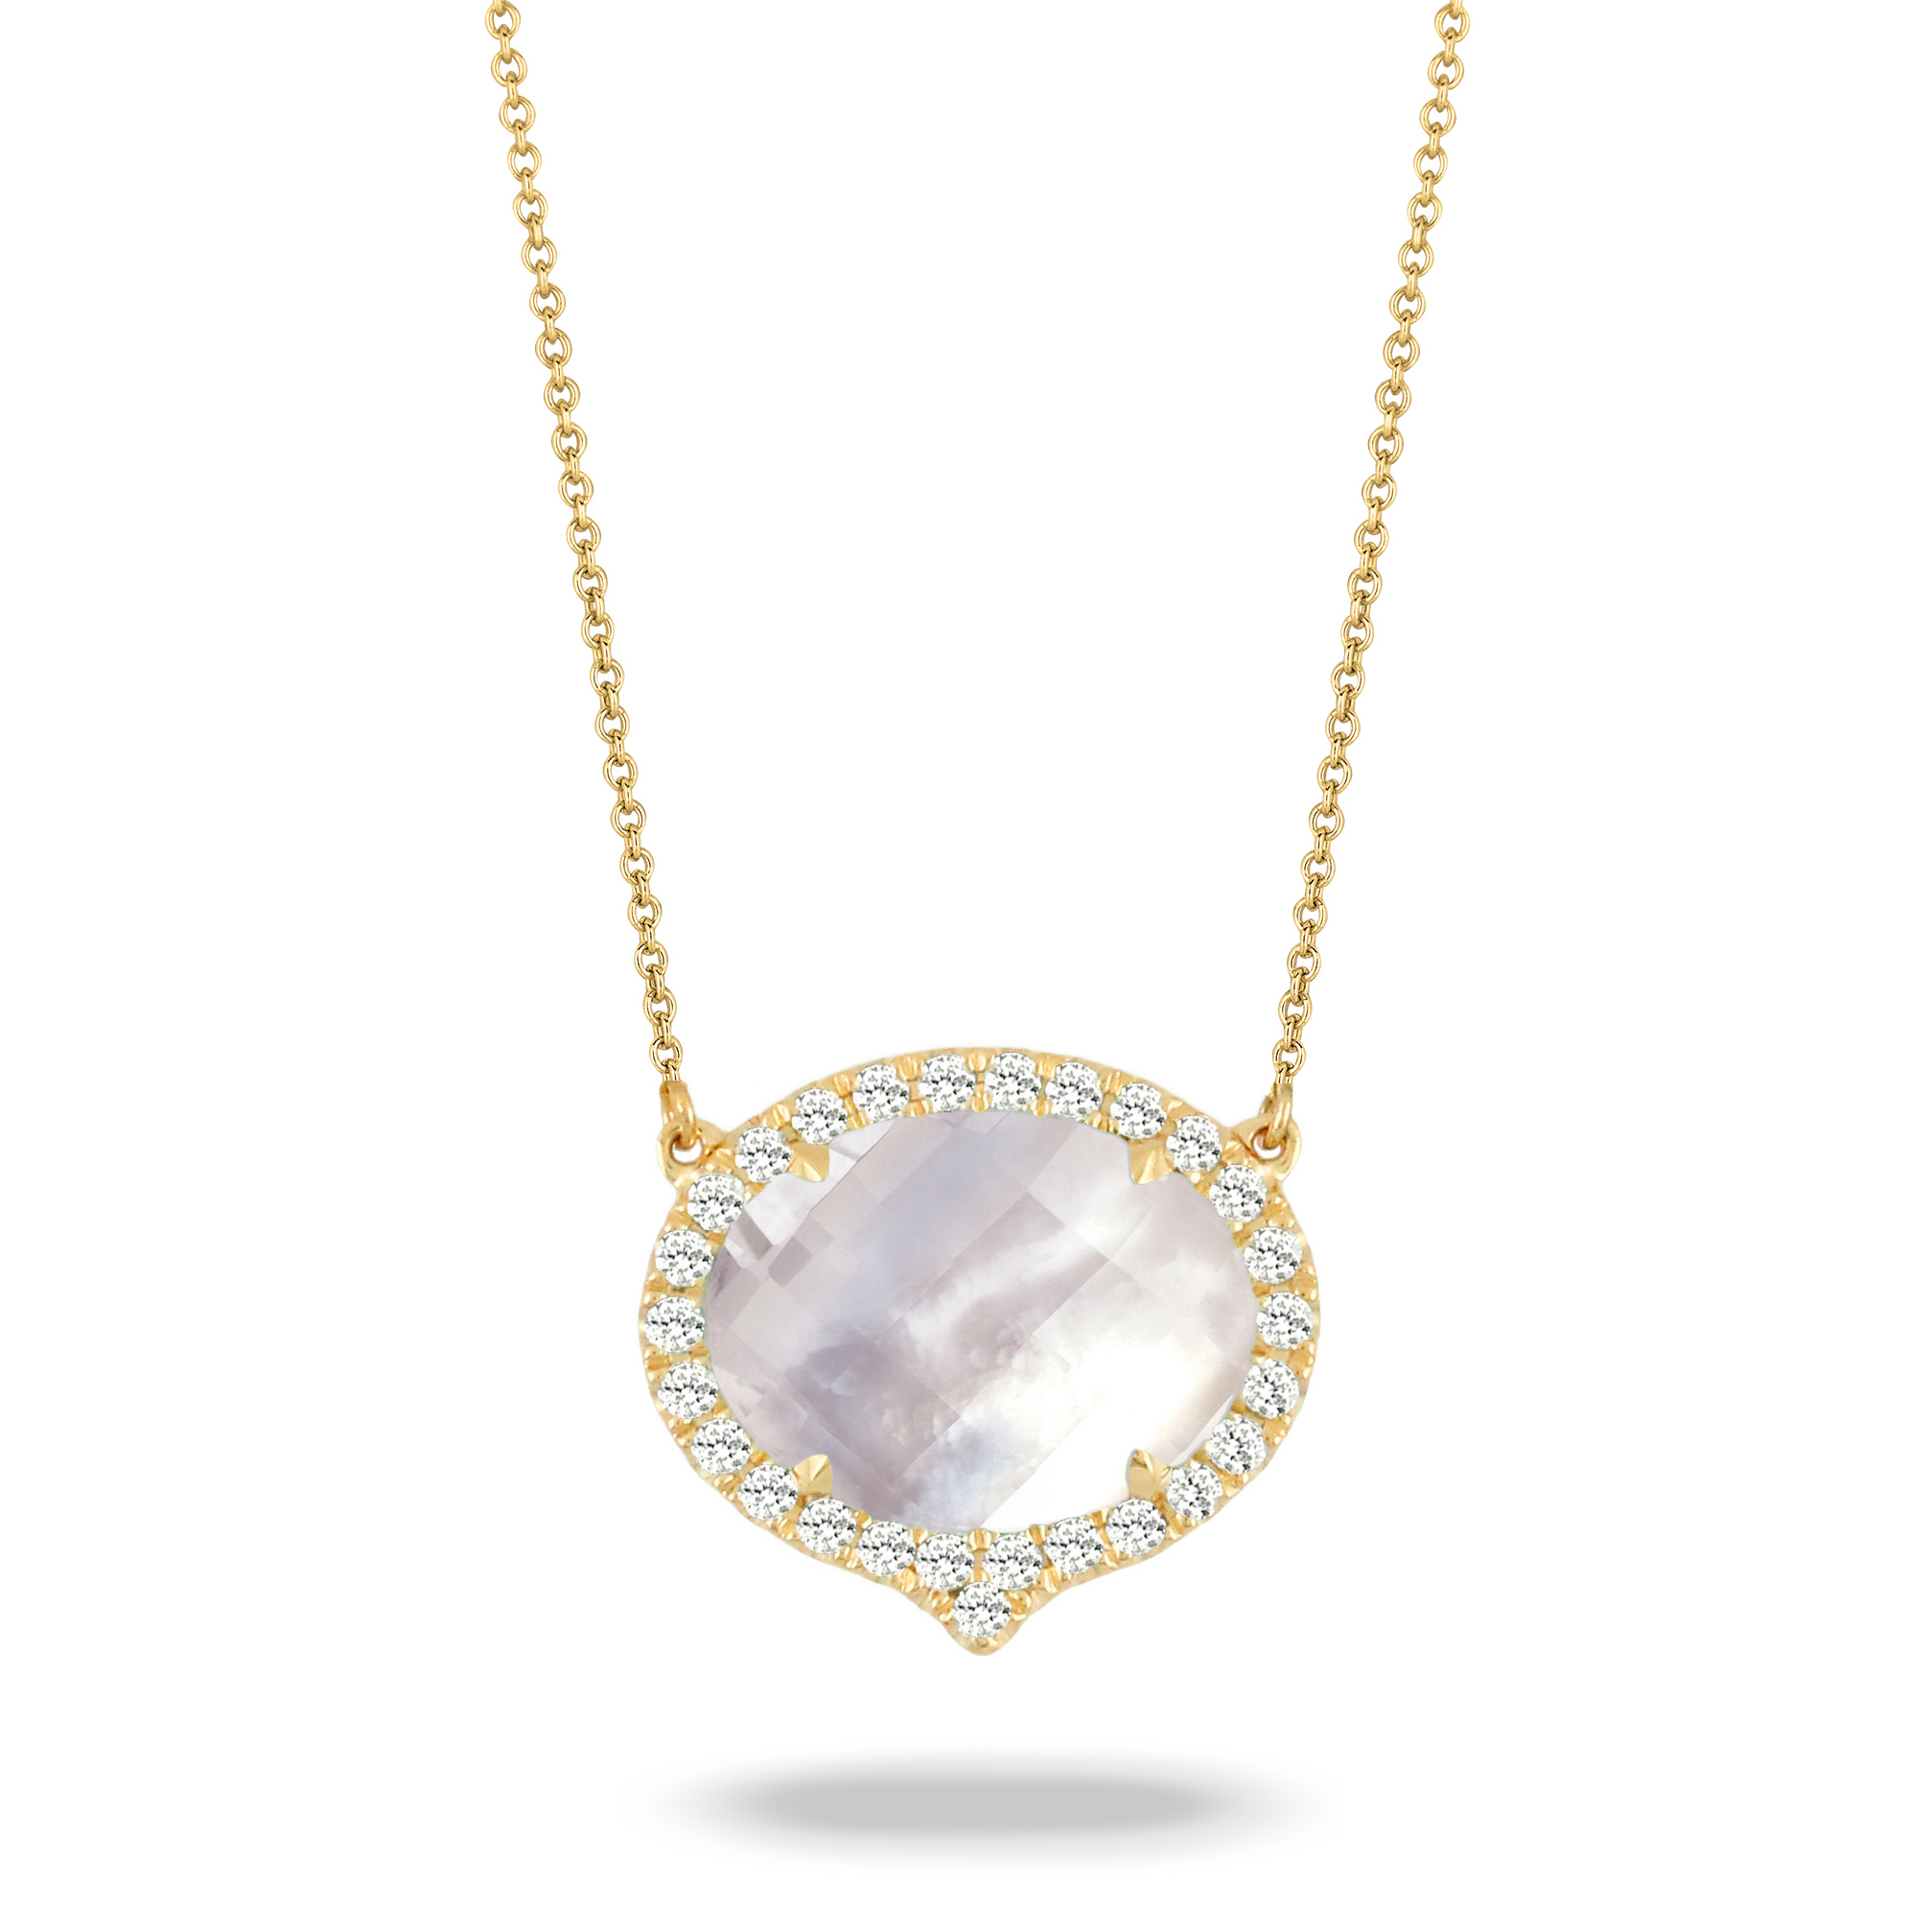 18K Yellow Gold Pearl Necklace - 18K Yellow Gold Diamond Necklace With Clear Quartz Over White Mother Of Pearl